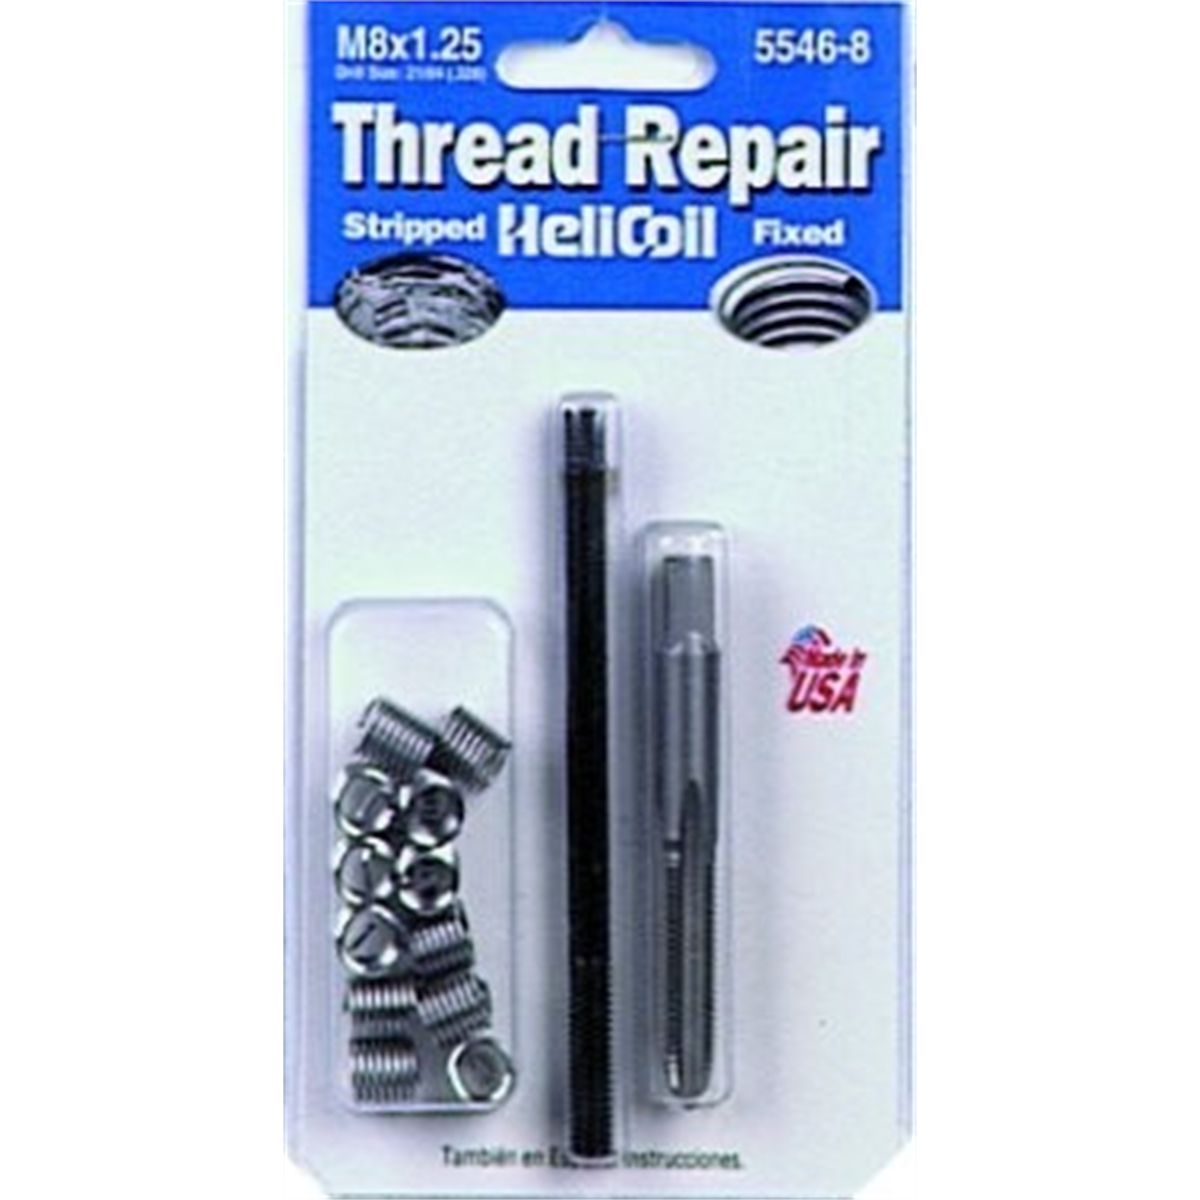 M6 X 1.0 Thread Repair Kit 25 Piece Helicoil Compatible 6mm Damaged Threads